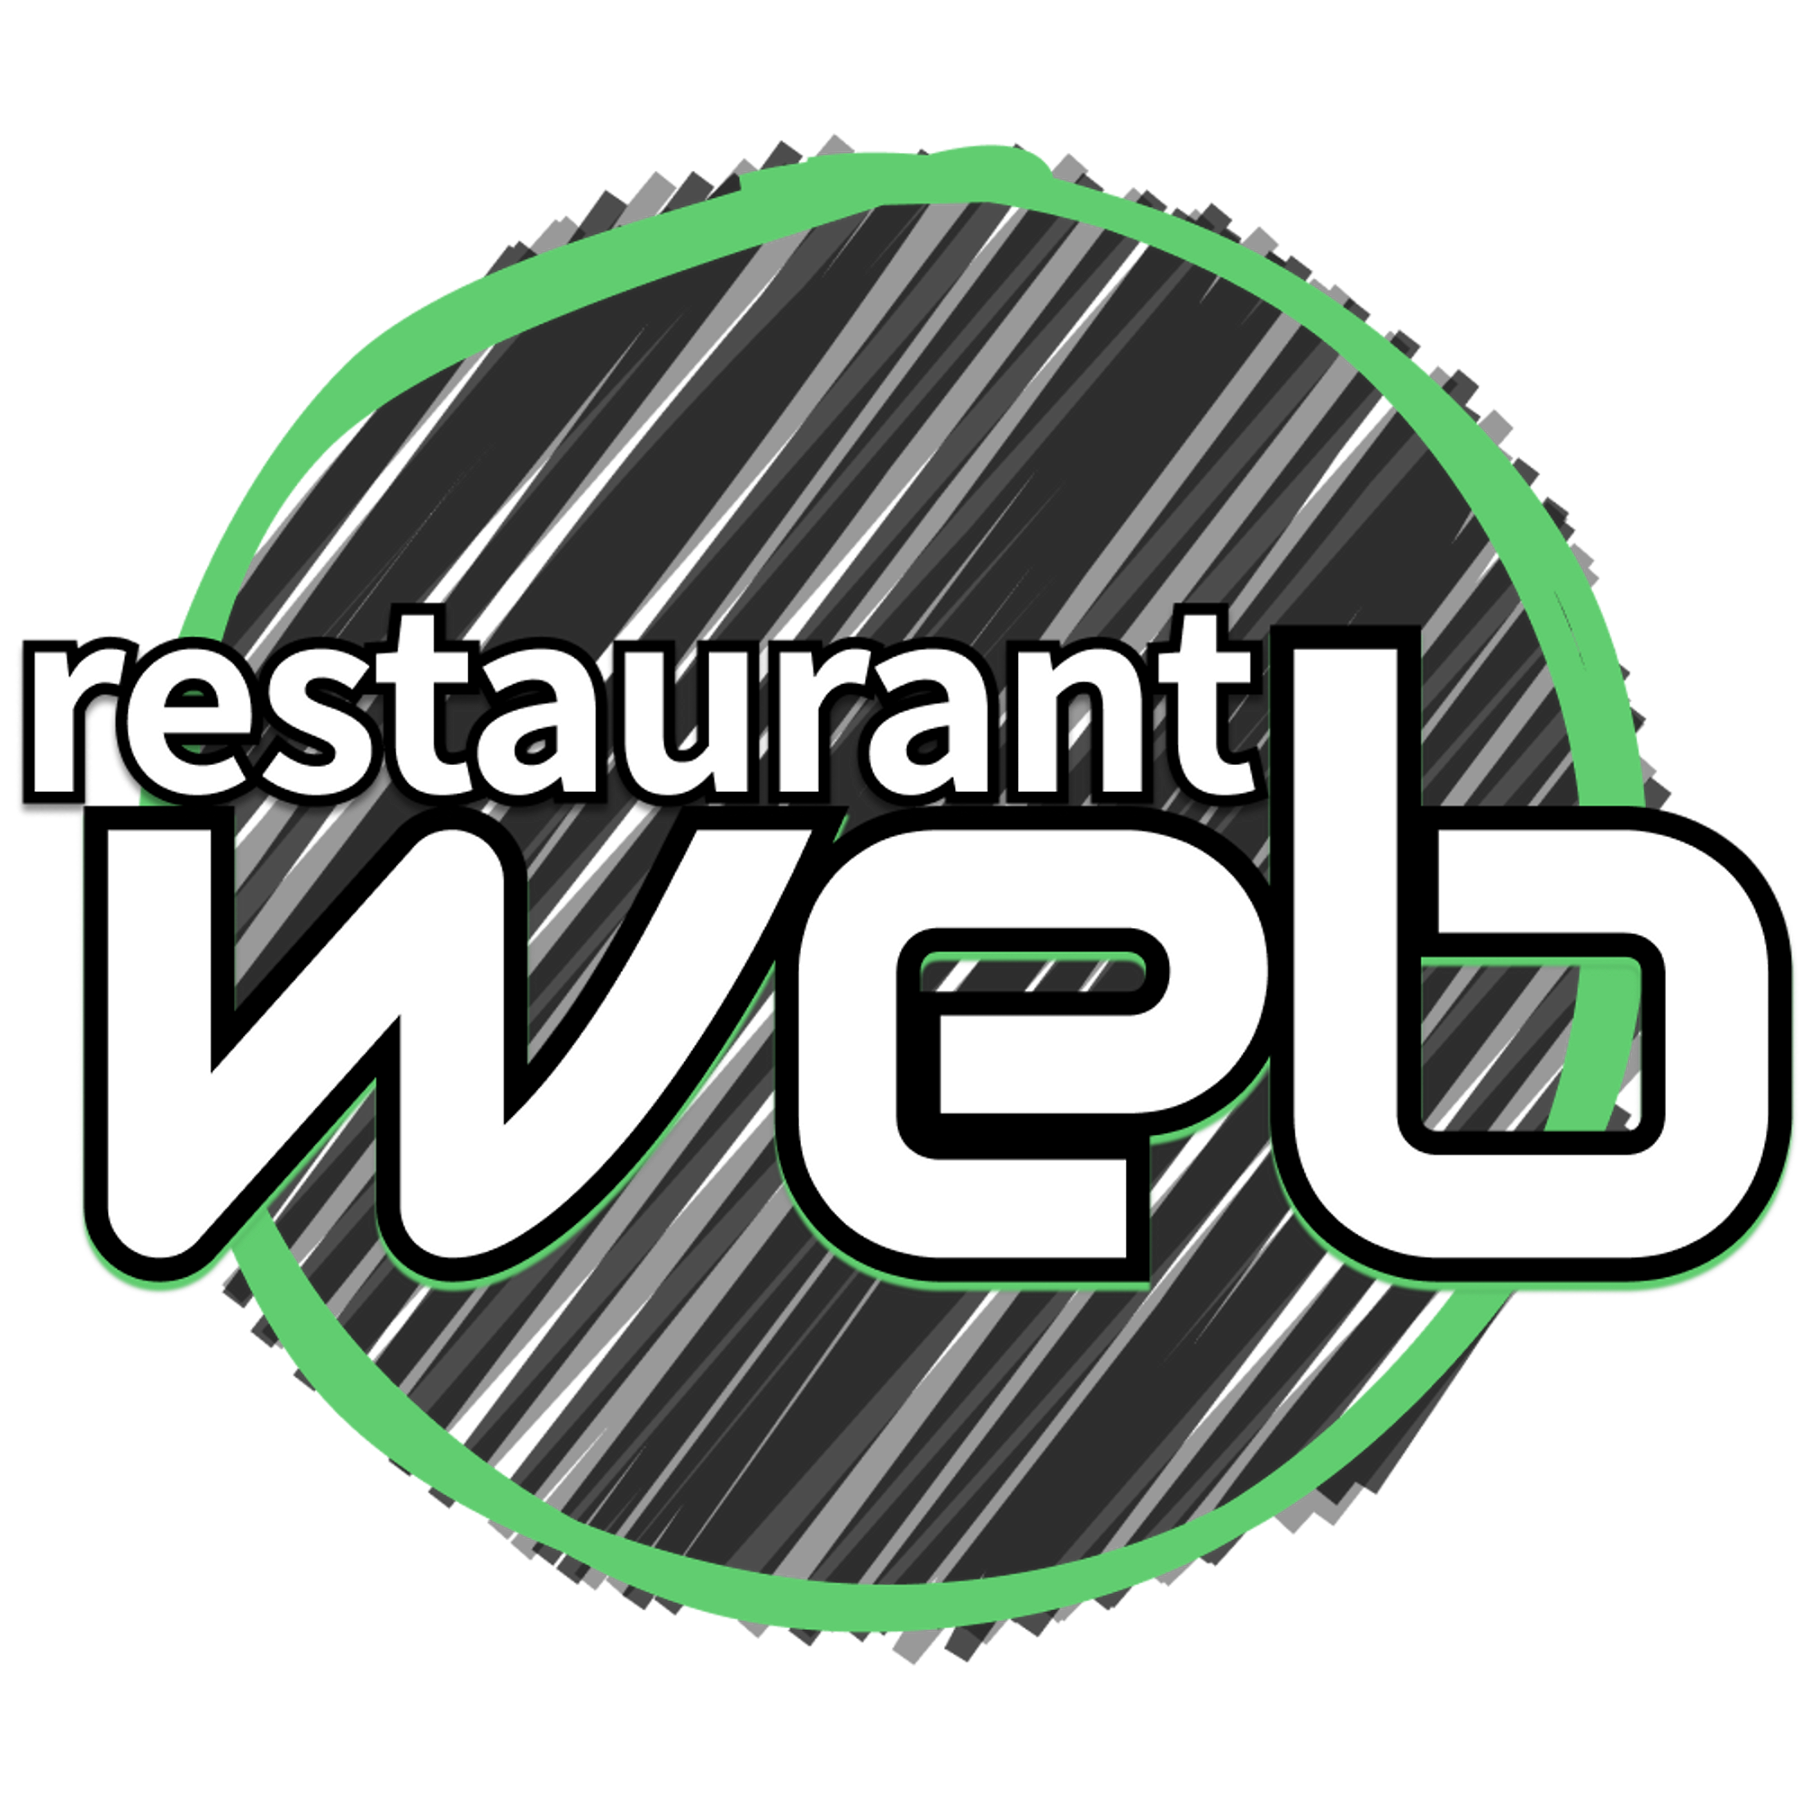 Need a Website for your Restaurant?